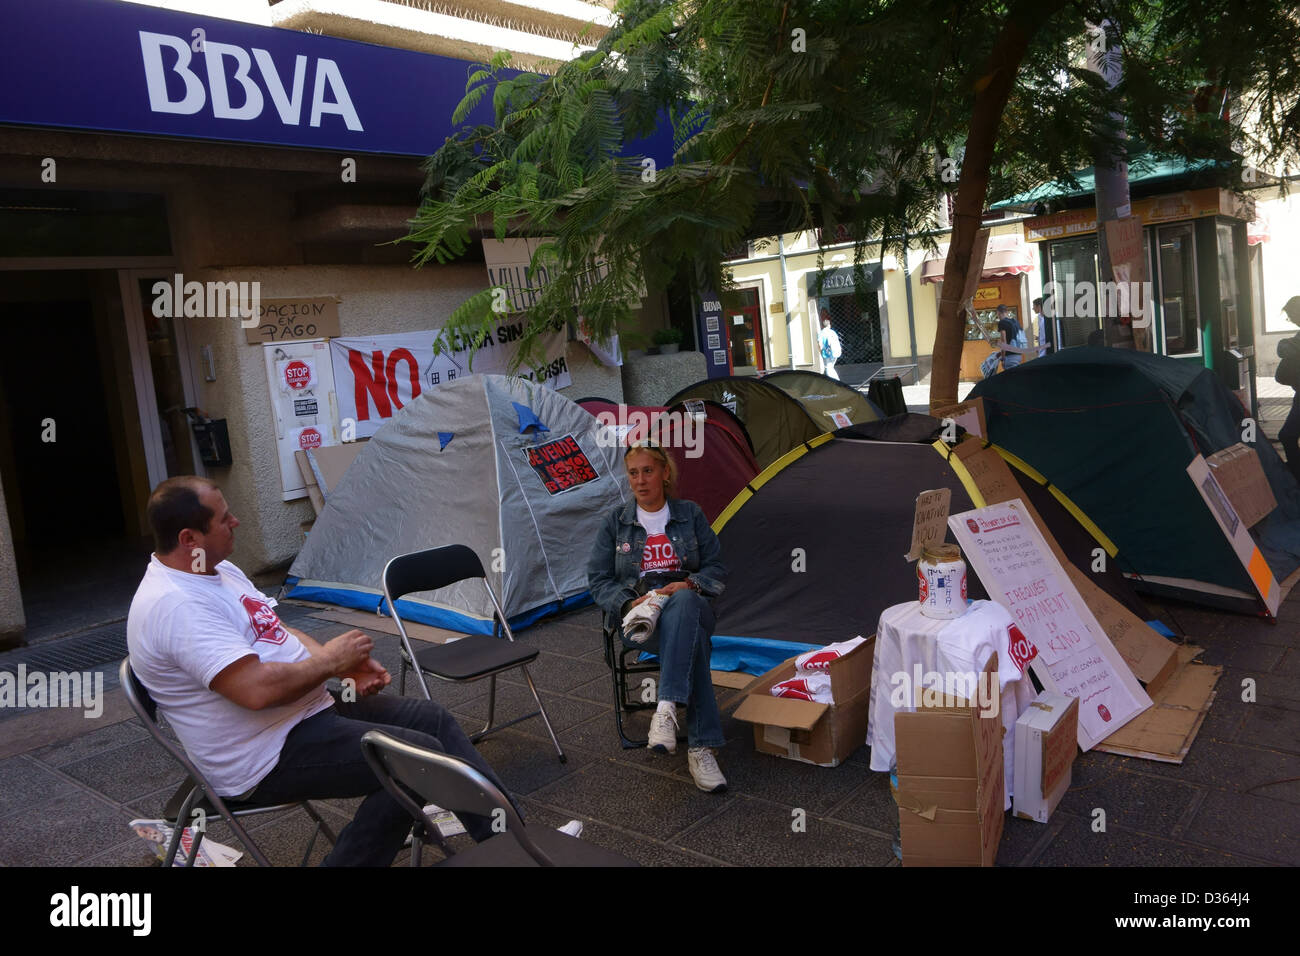 Protest against bank evictions in Spain - Santa Cruz de Tenerife, Canary Islands. 'Occupy' style protest camp outside bank. Stock Photo